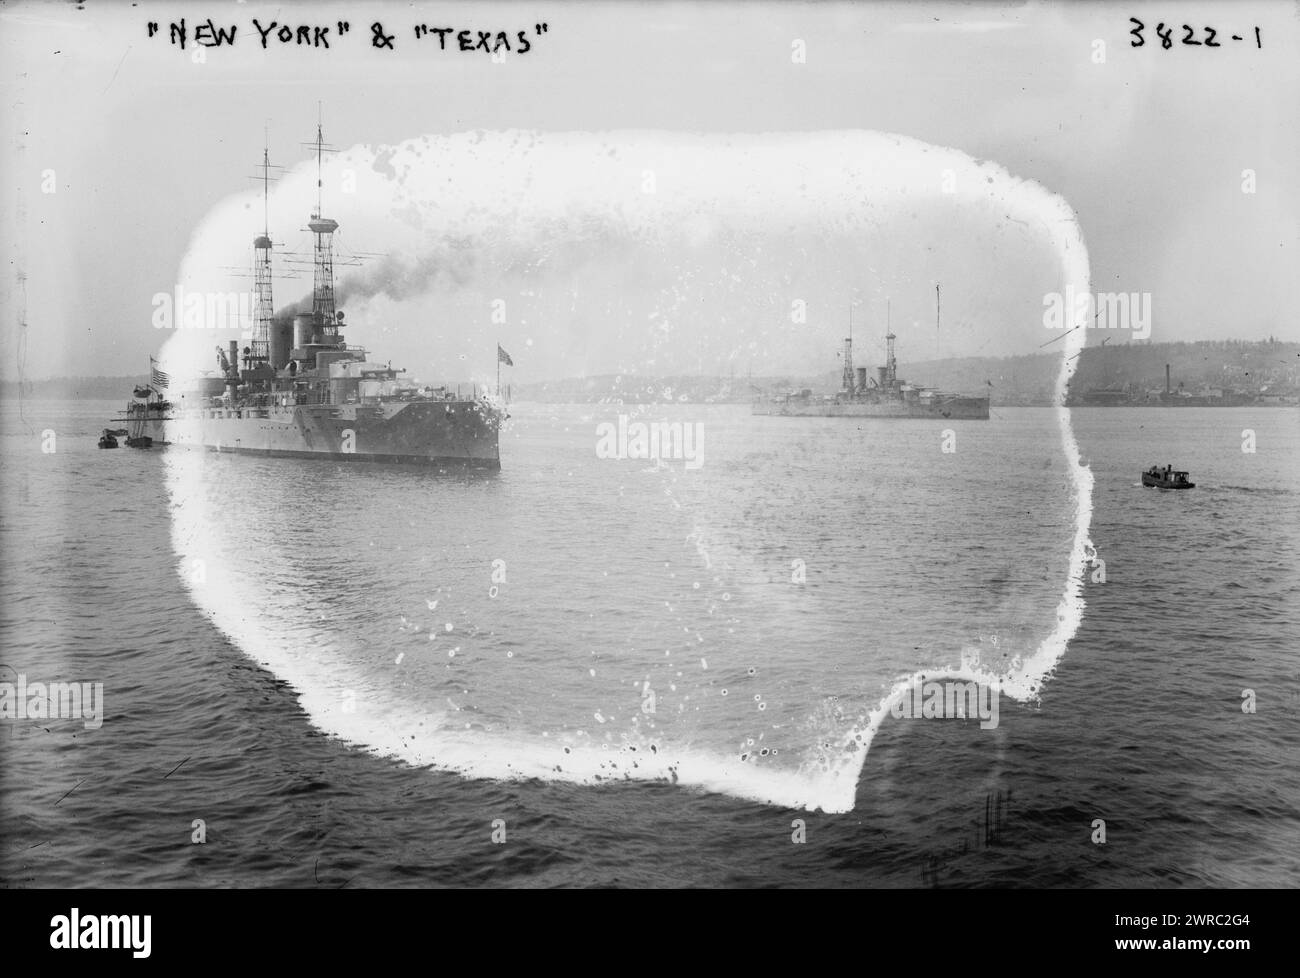 NEW YORK & TEXAS, Photograph shows the battleships USS New York(BB-34) and the USS Texas(BB-35), possibly in the Hudson River., between ca. 1915 and ca. 1920, Glass negatives, 1 negative: glass Stock Photo